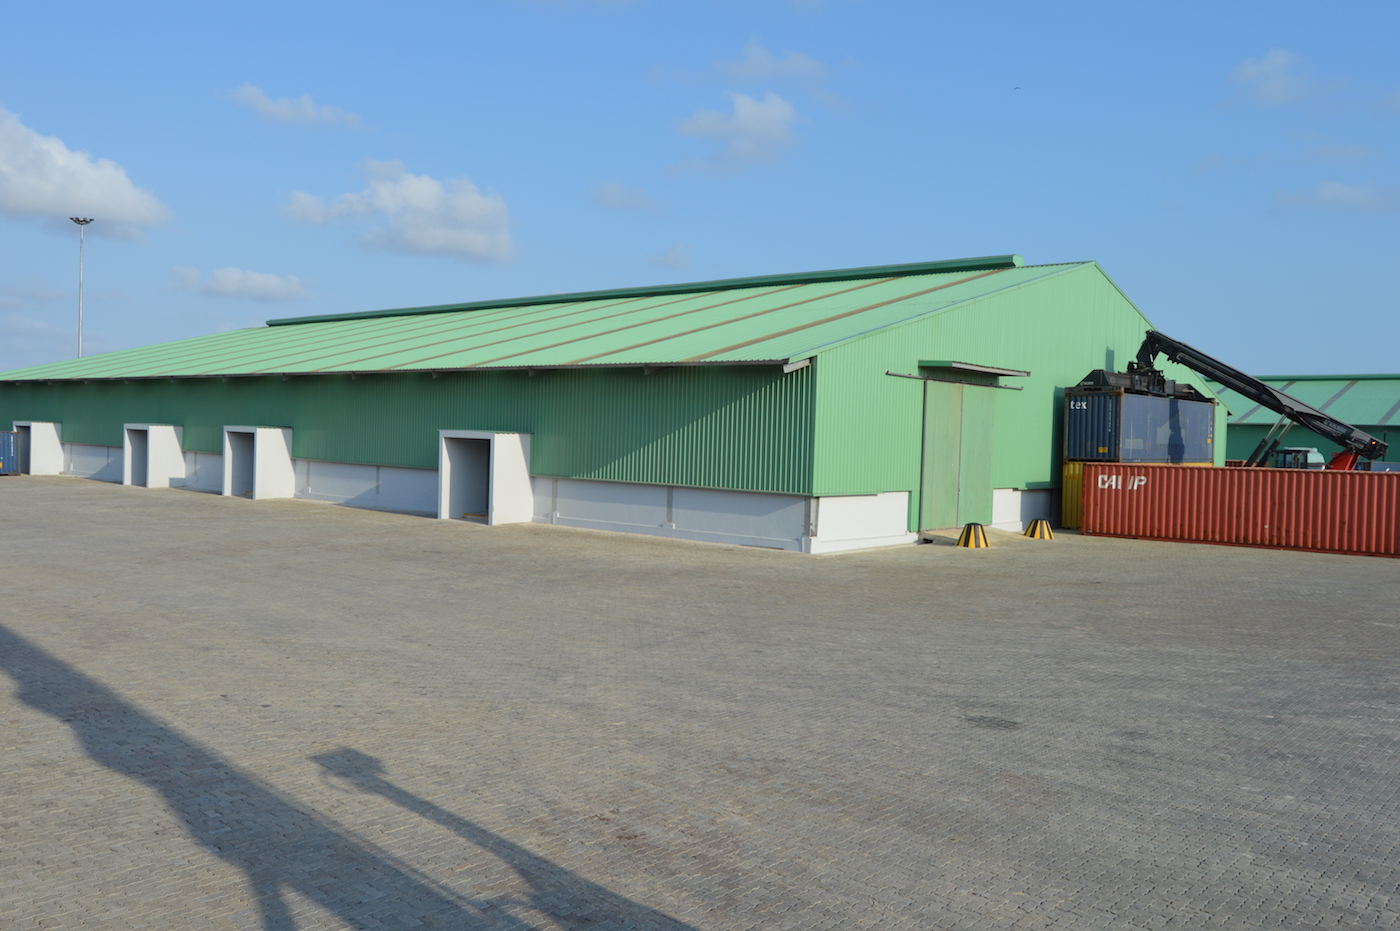  Cross-loading facility, 3278sq.meters multipurpose facility for offloading/stuffing containers below roof not depending from weather conditions